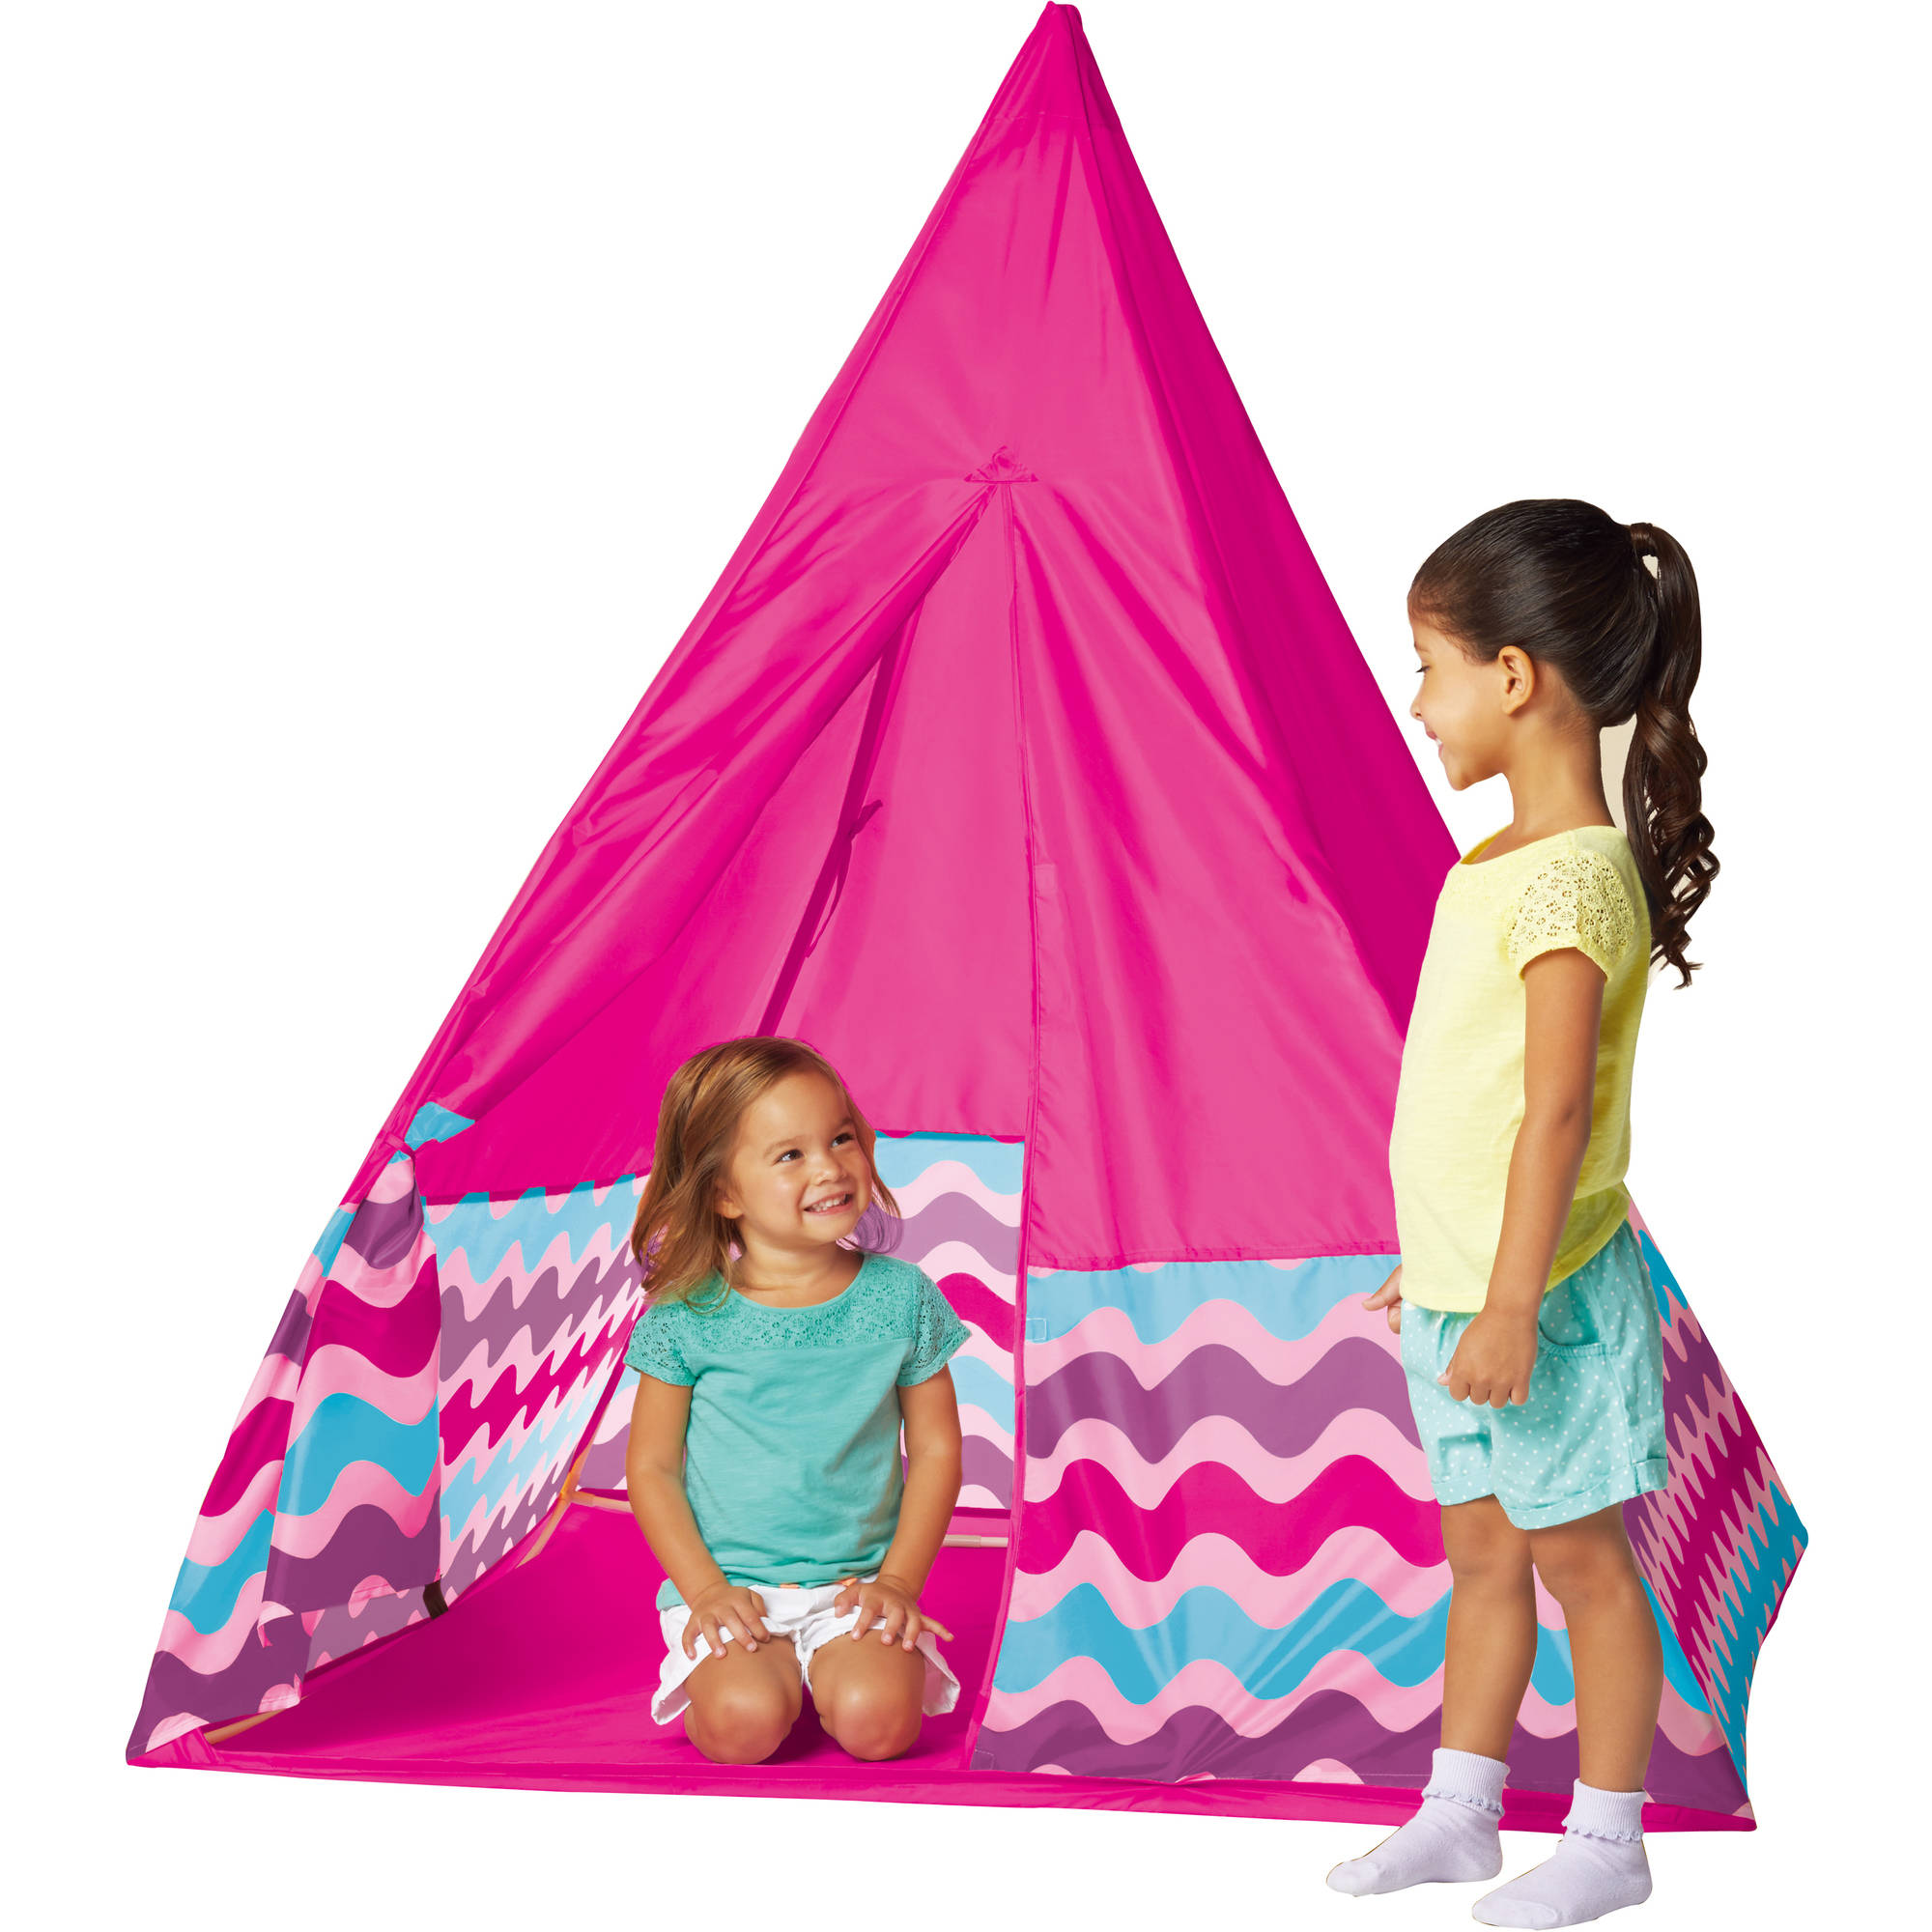 Chevron Patterned Fabric Kids' Play Tepee, Pink - image 1 of 2